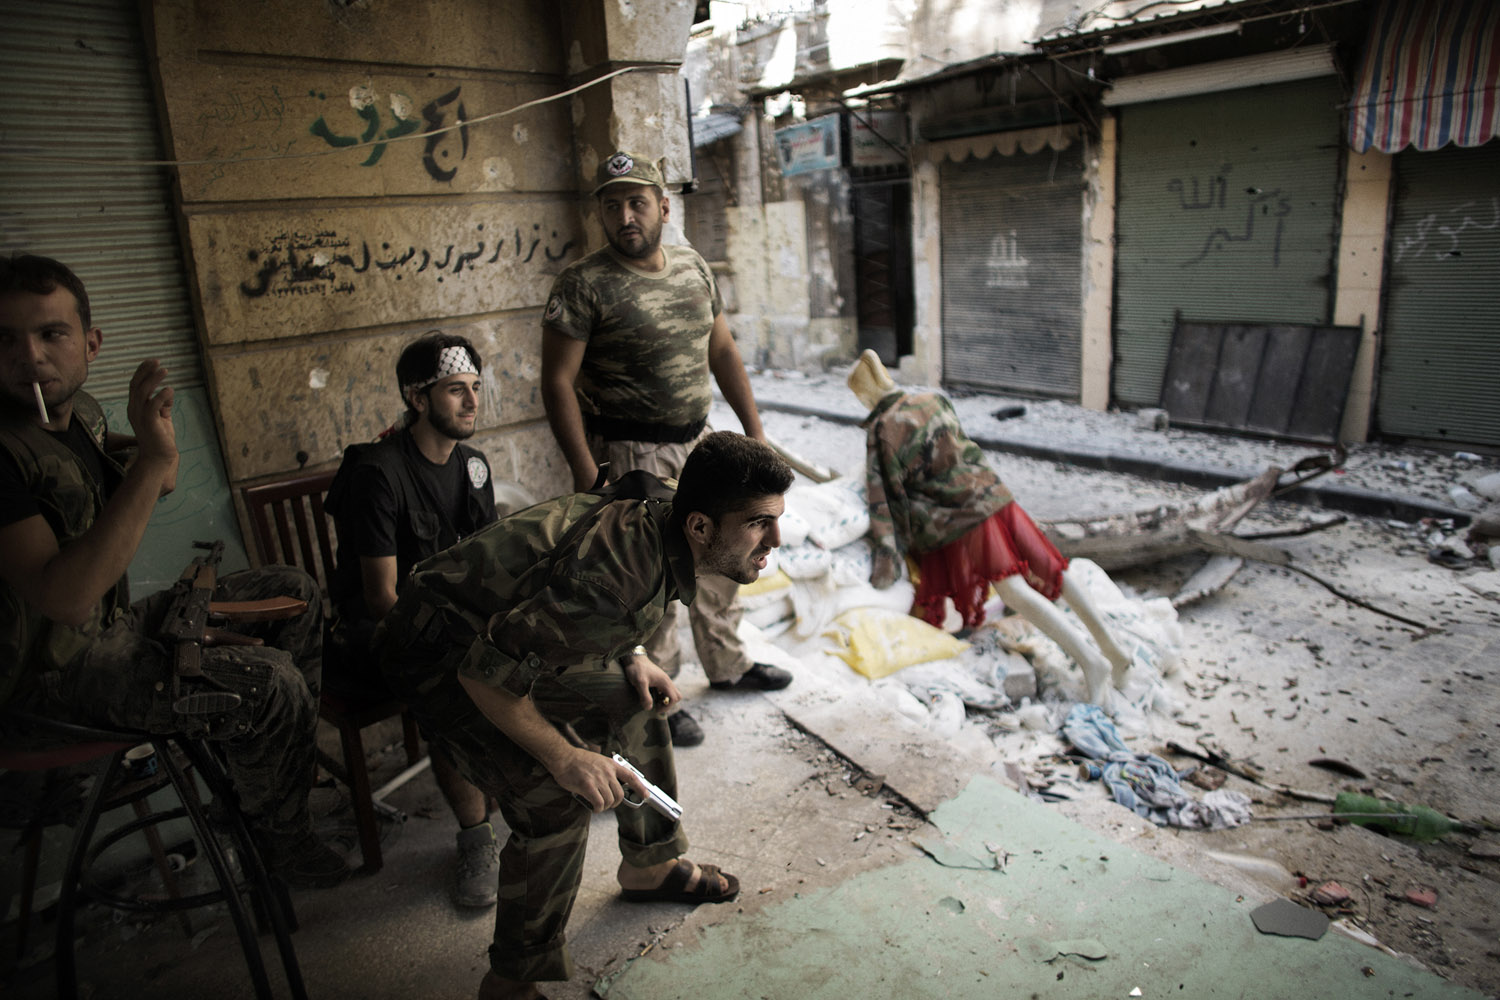 Sept. 16, 2012. Free Syria Army fighters man a position in the Old City of Aleppo, Syria.